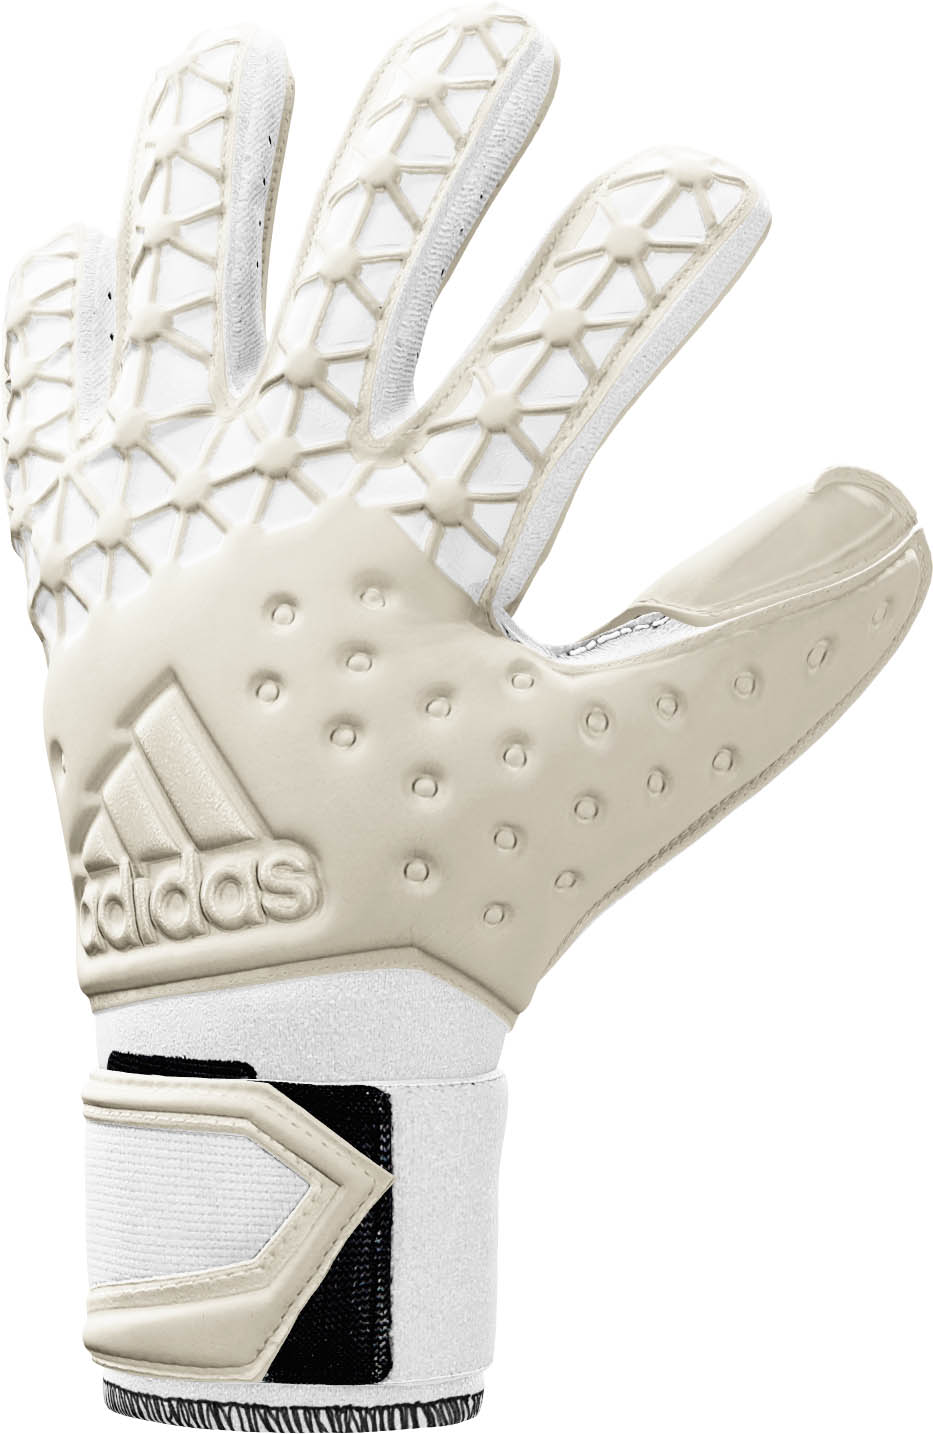 Gang tay thu mon Adidas Ace miAdidas www.soccerstore.vn